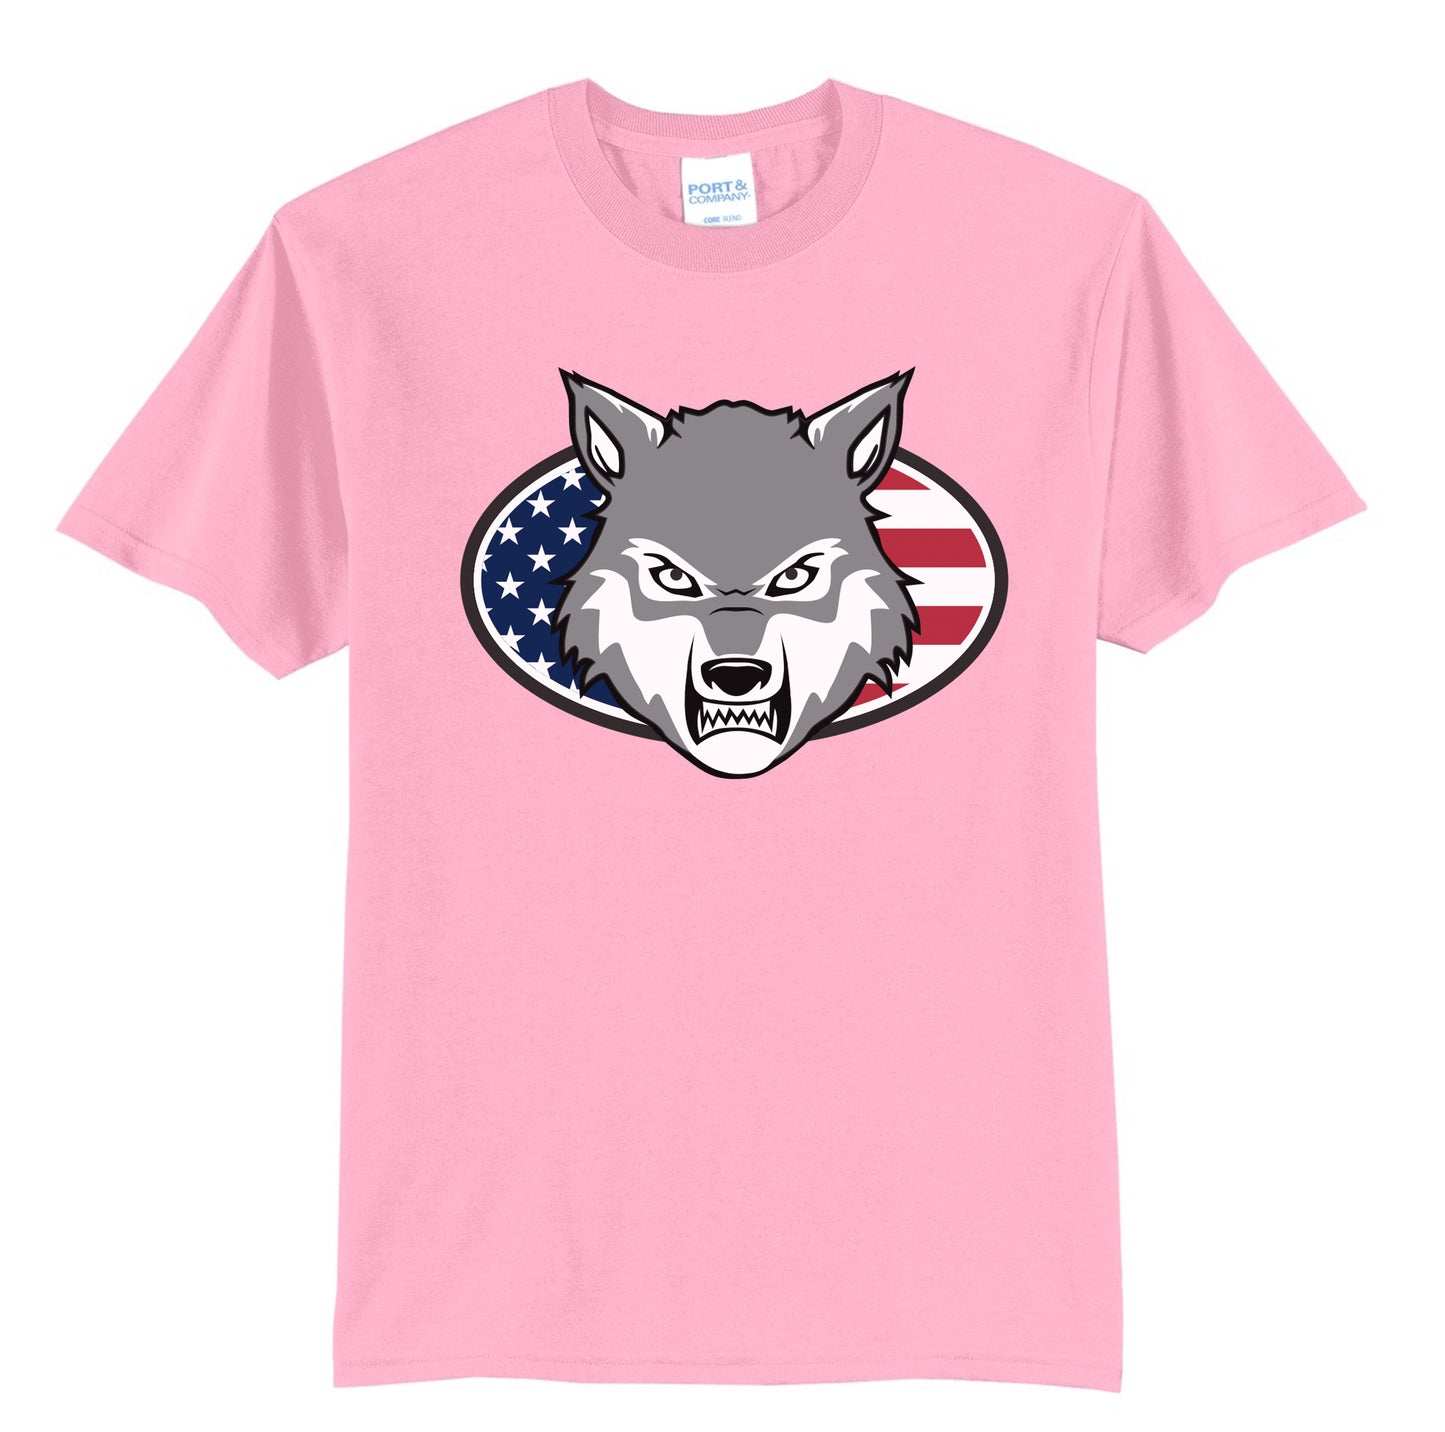 USA Wolves (Various colors & styles)